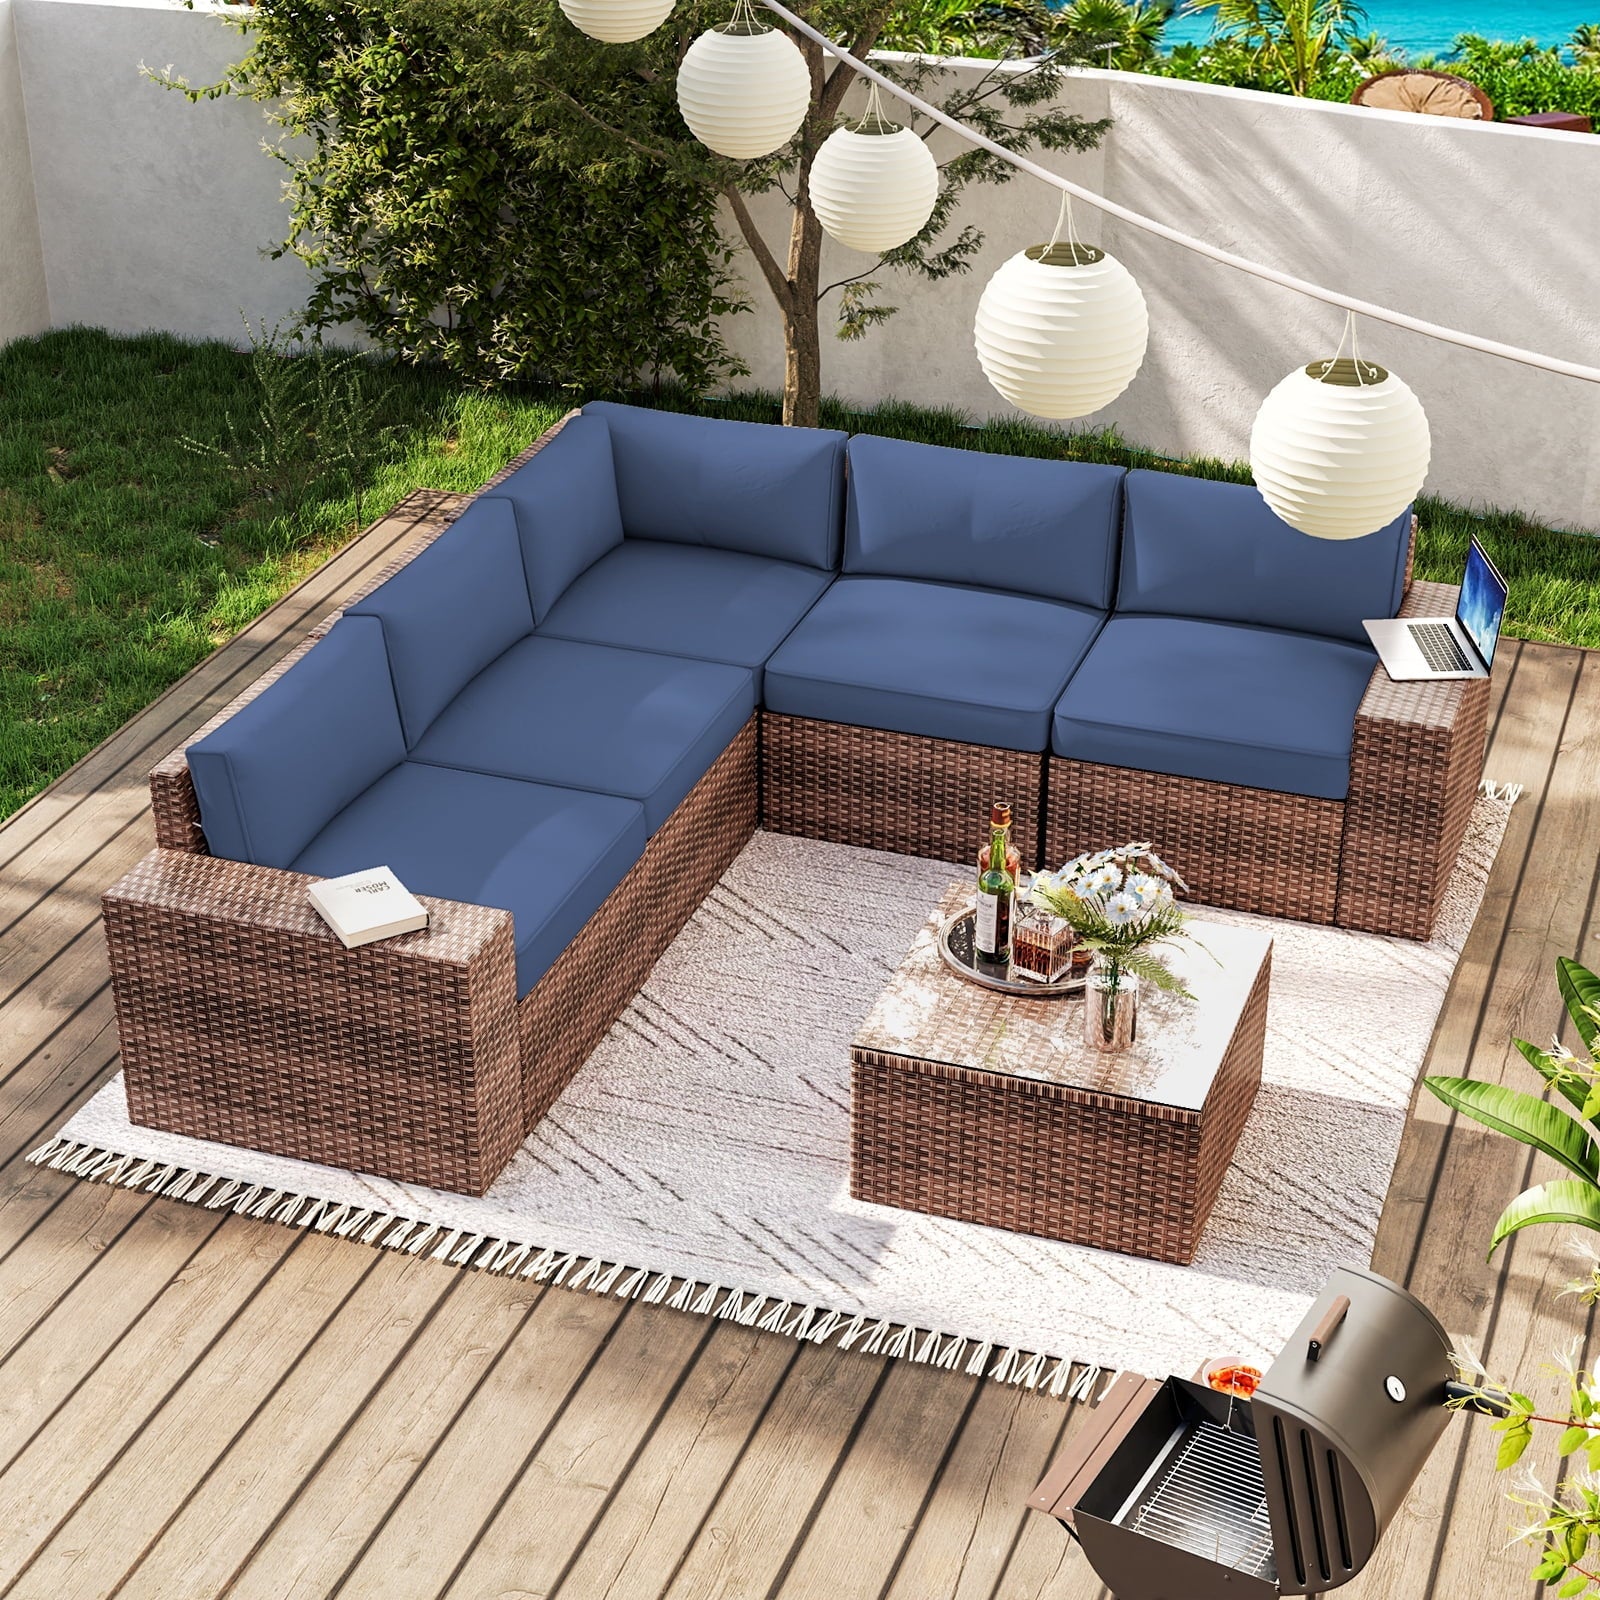 6 Pieces Patio Furniture Sets With Waterproof Cover, Outdoor Sectional Rattan Sofa Set, Outdoor Furniture Set with Coffee Table, Blue